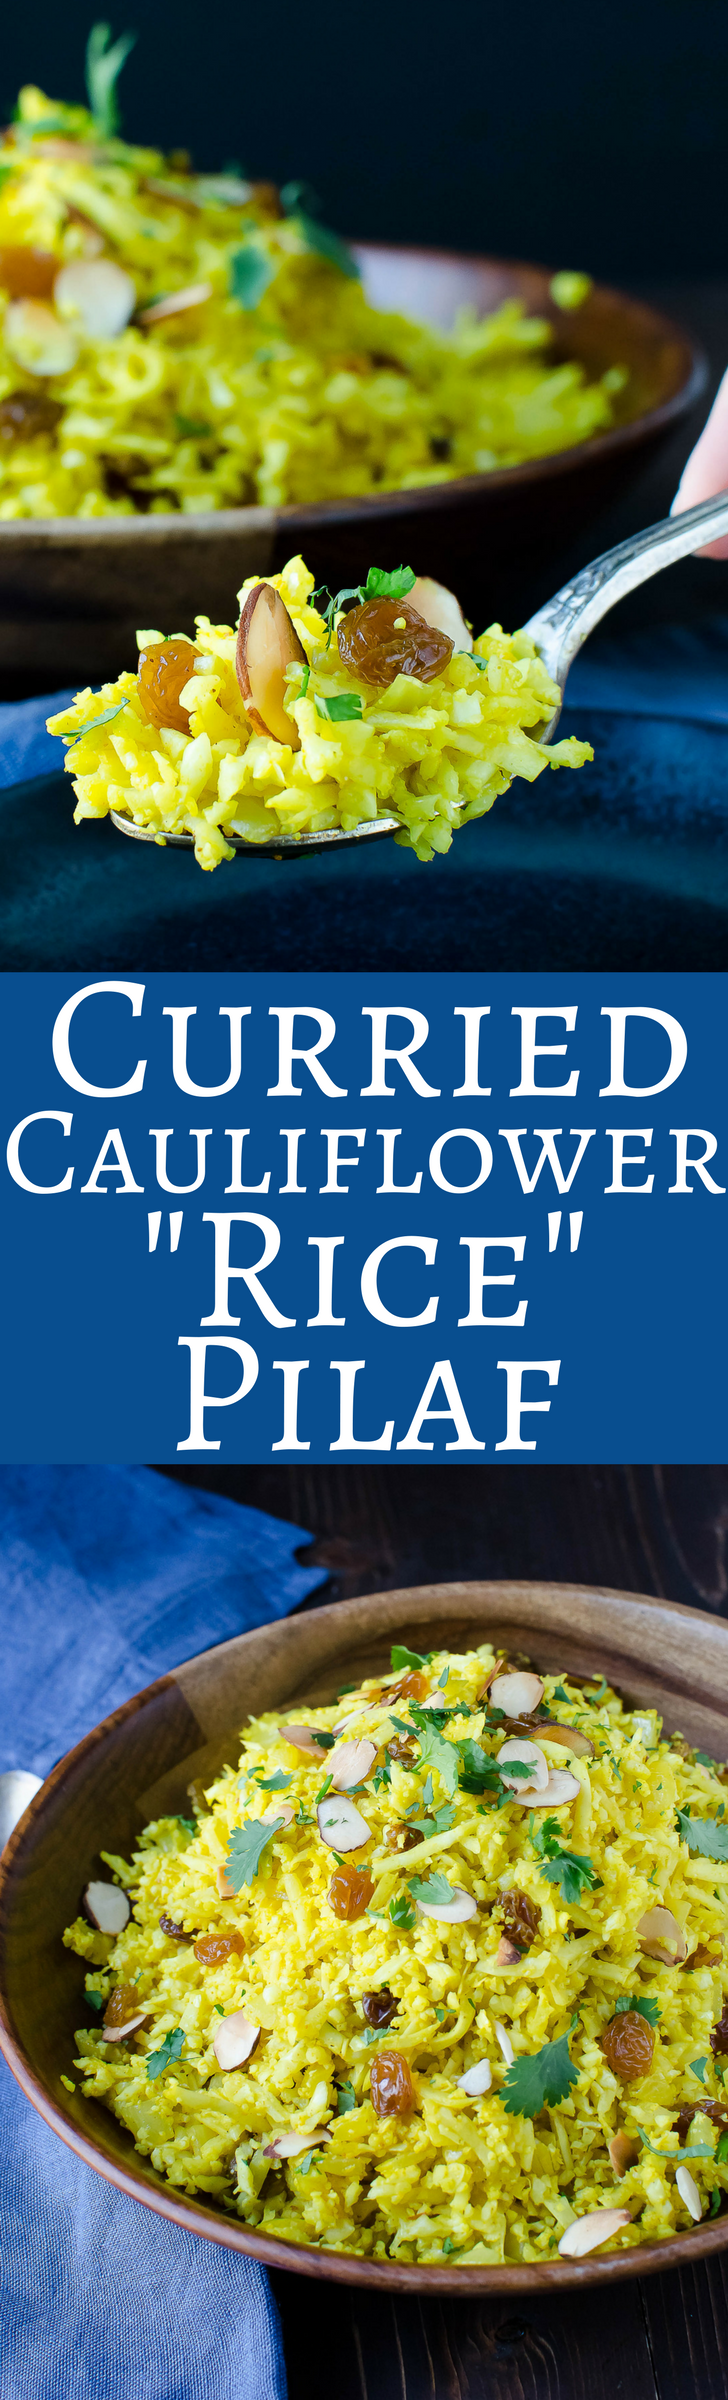 Curried Cauliflower "Rice" Pilaf is an easy, delicious, healthy side dish! Make it easier with Trader Joe's cauliflower rice. Paleo & Vegan too!